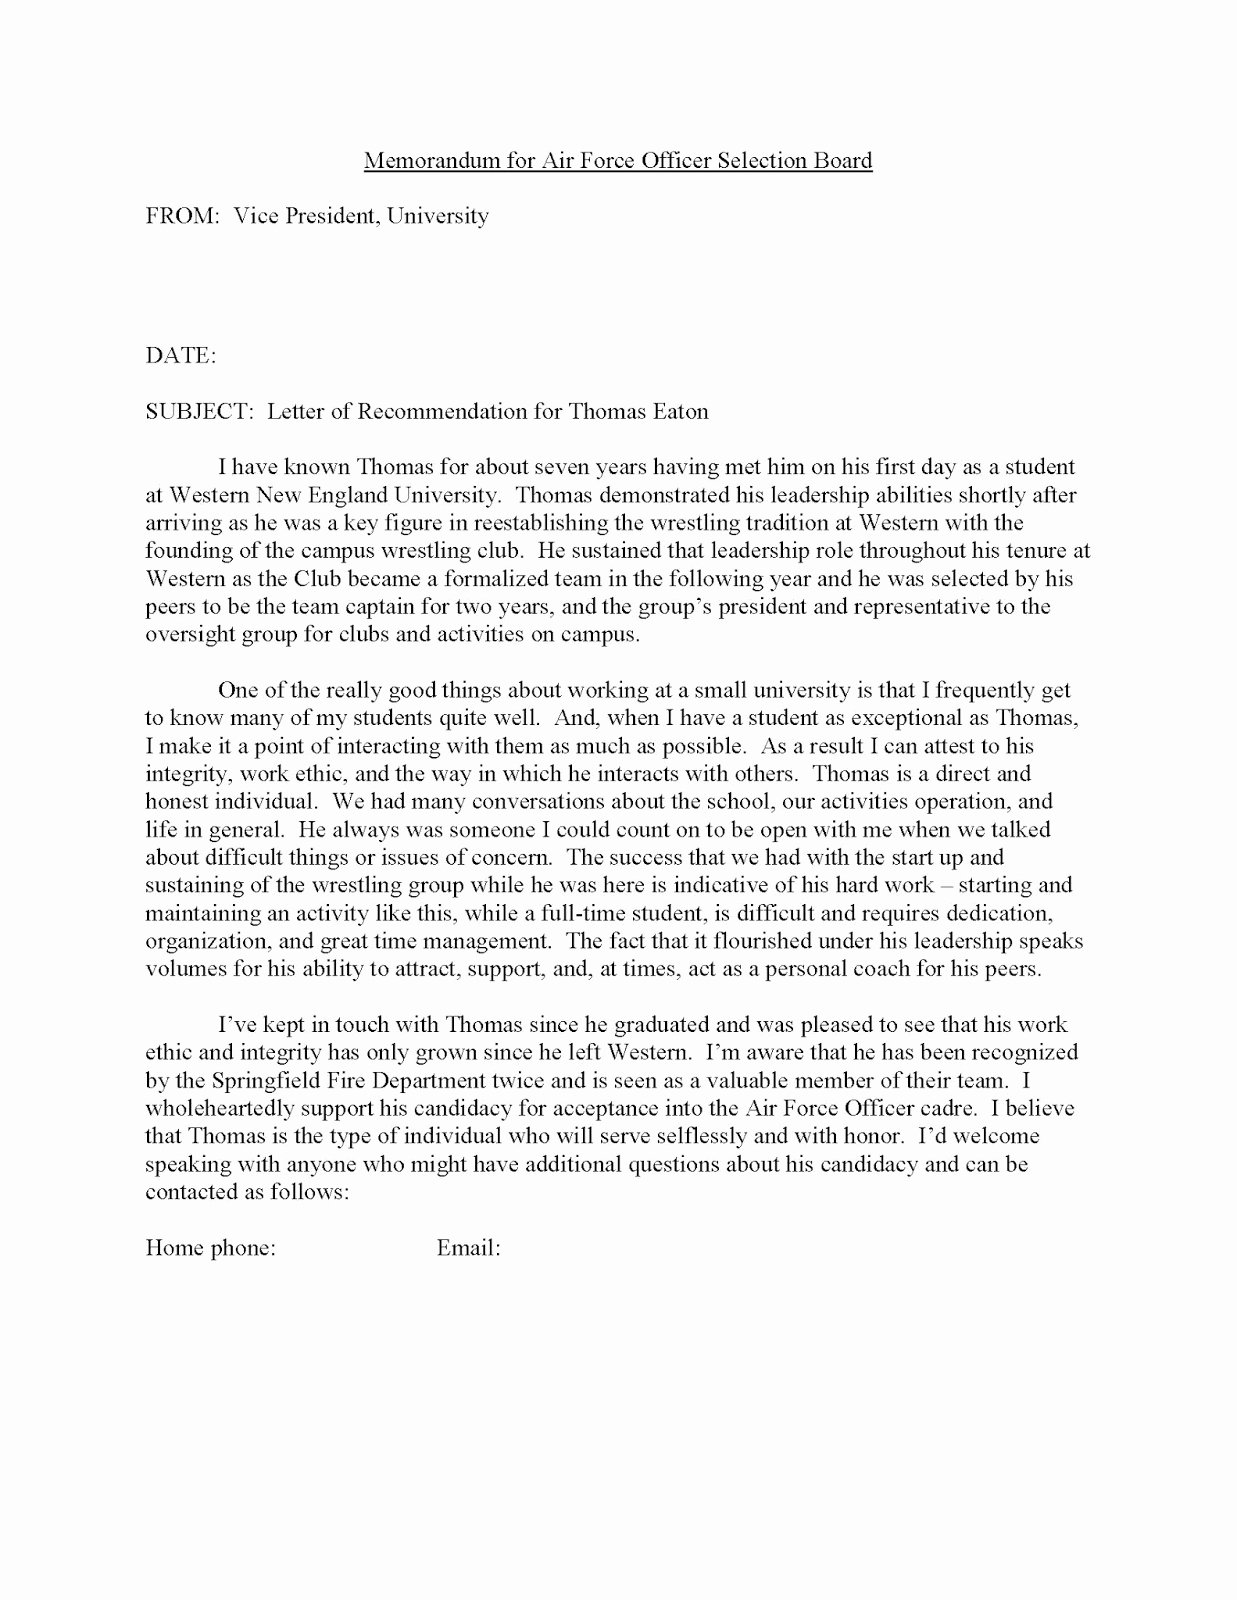 Air force Letter Of Recommendation Elegant Example